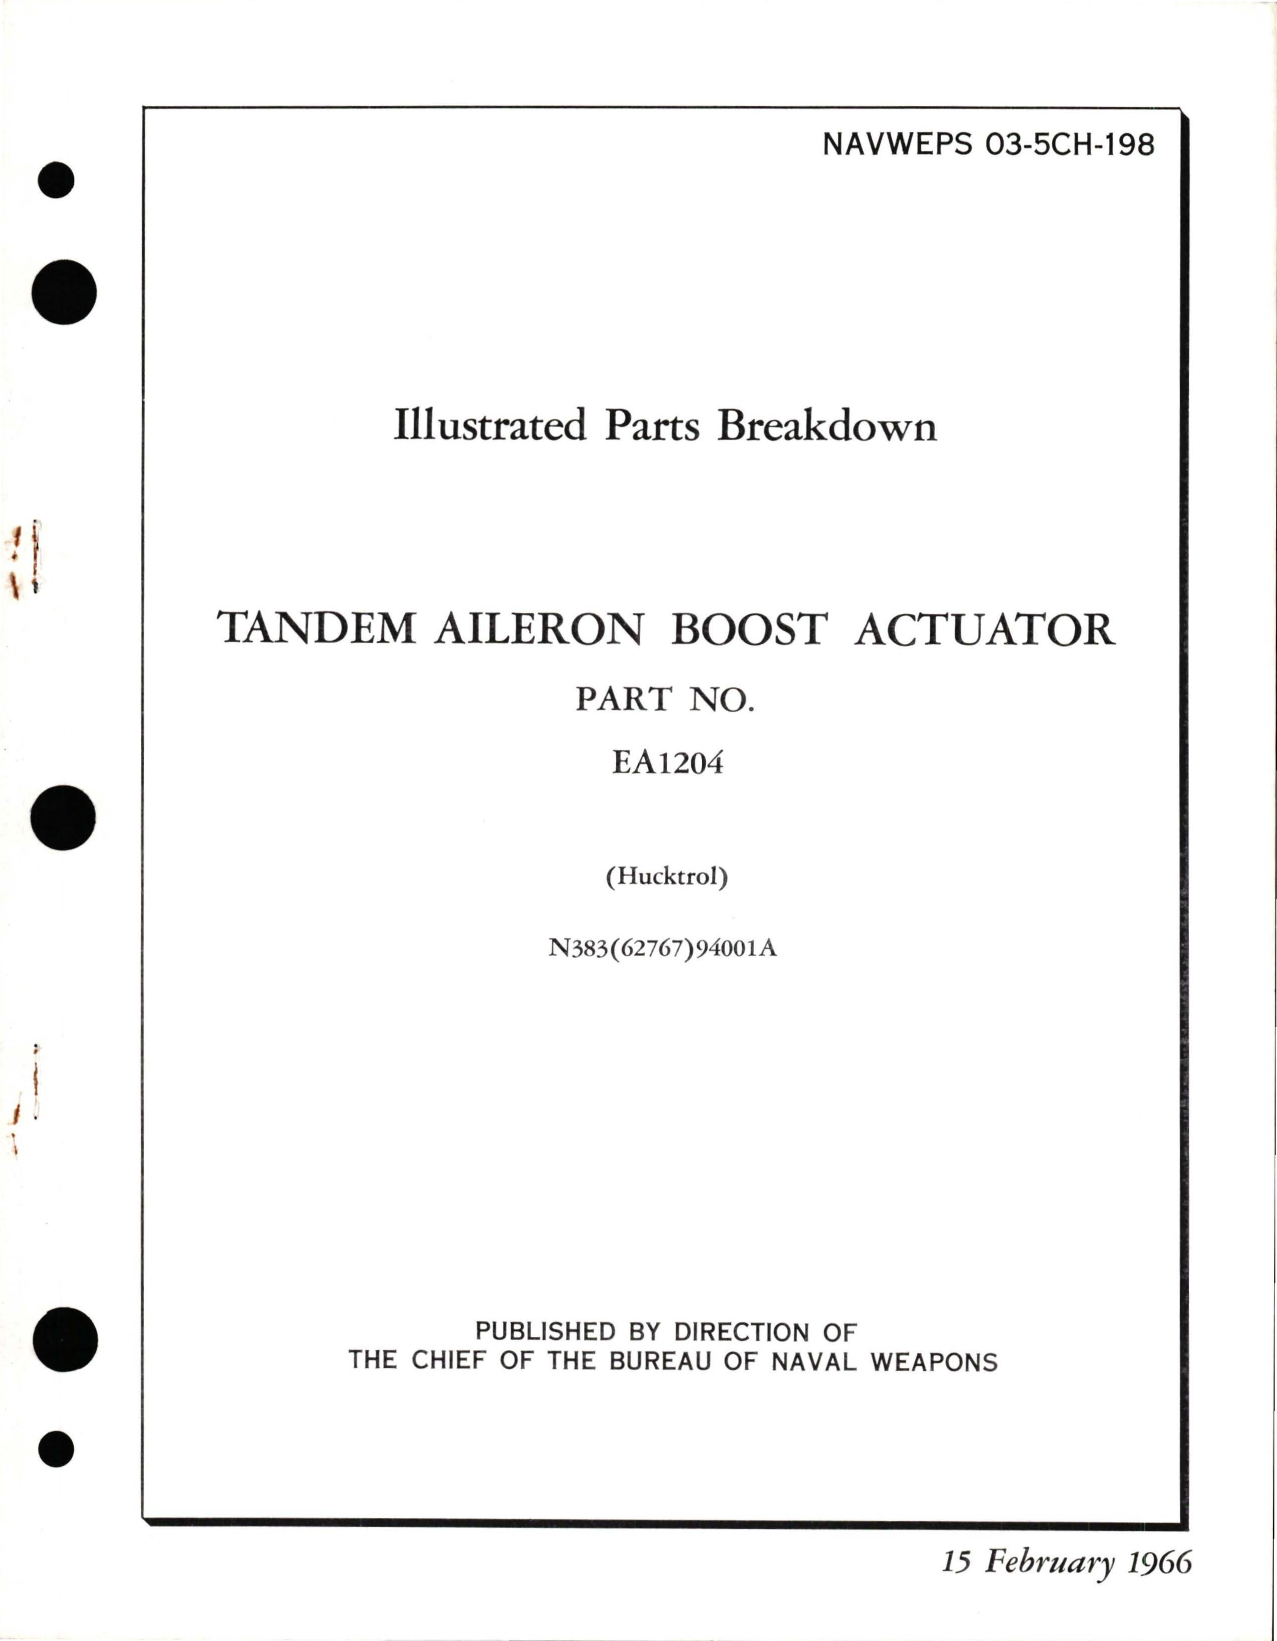 Sample page 1 from AirCorps Library document: Illustrated Parts Breakdown for Tandem Aileron Boost Actuator - Part EA1204